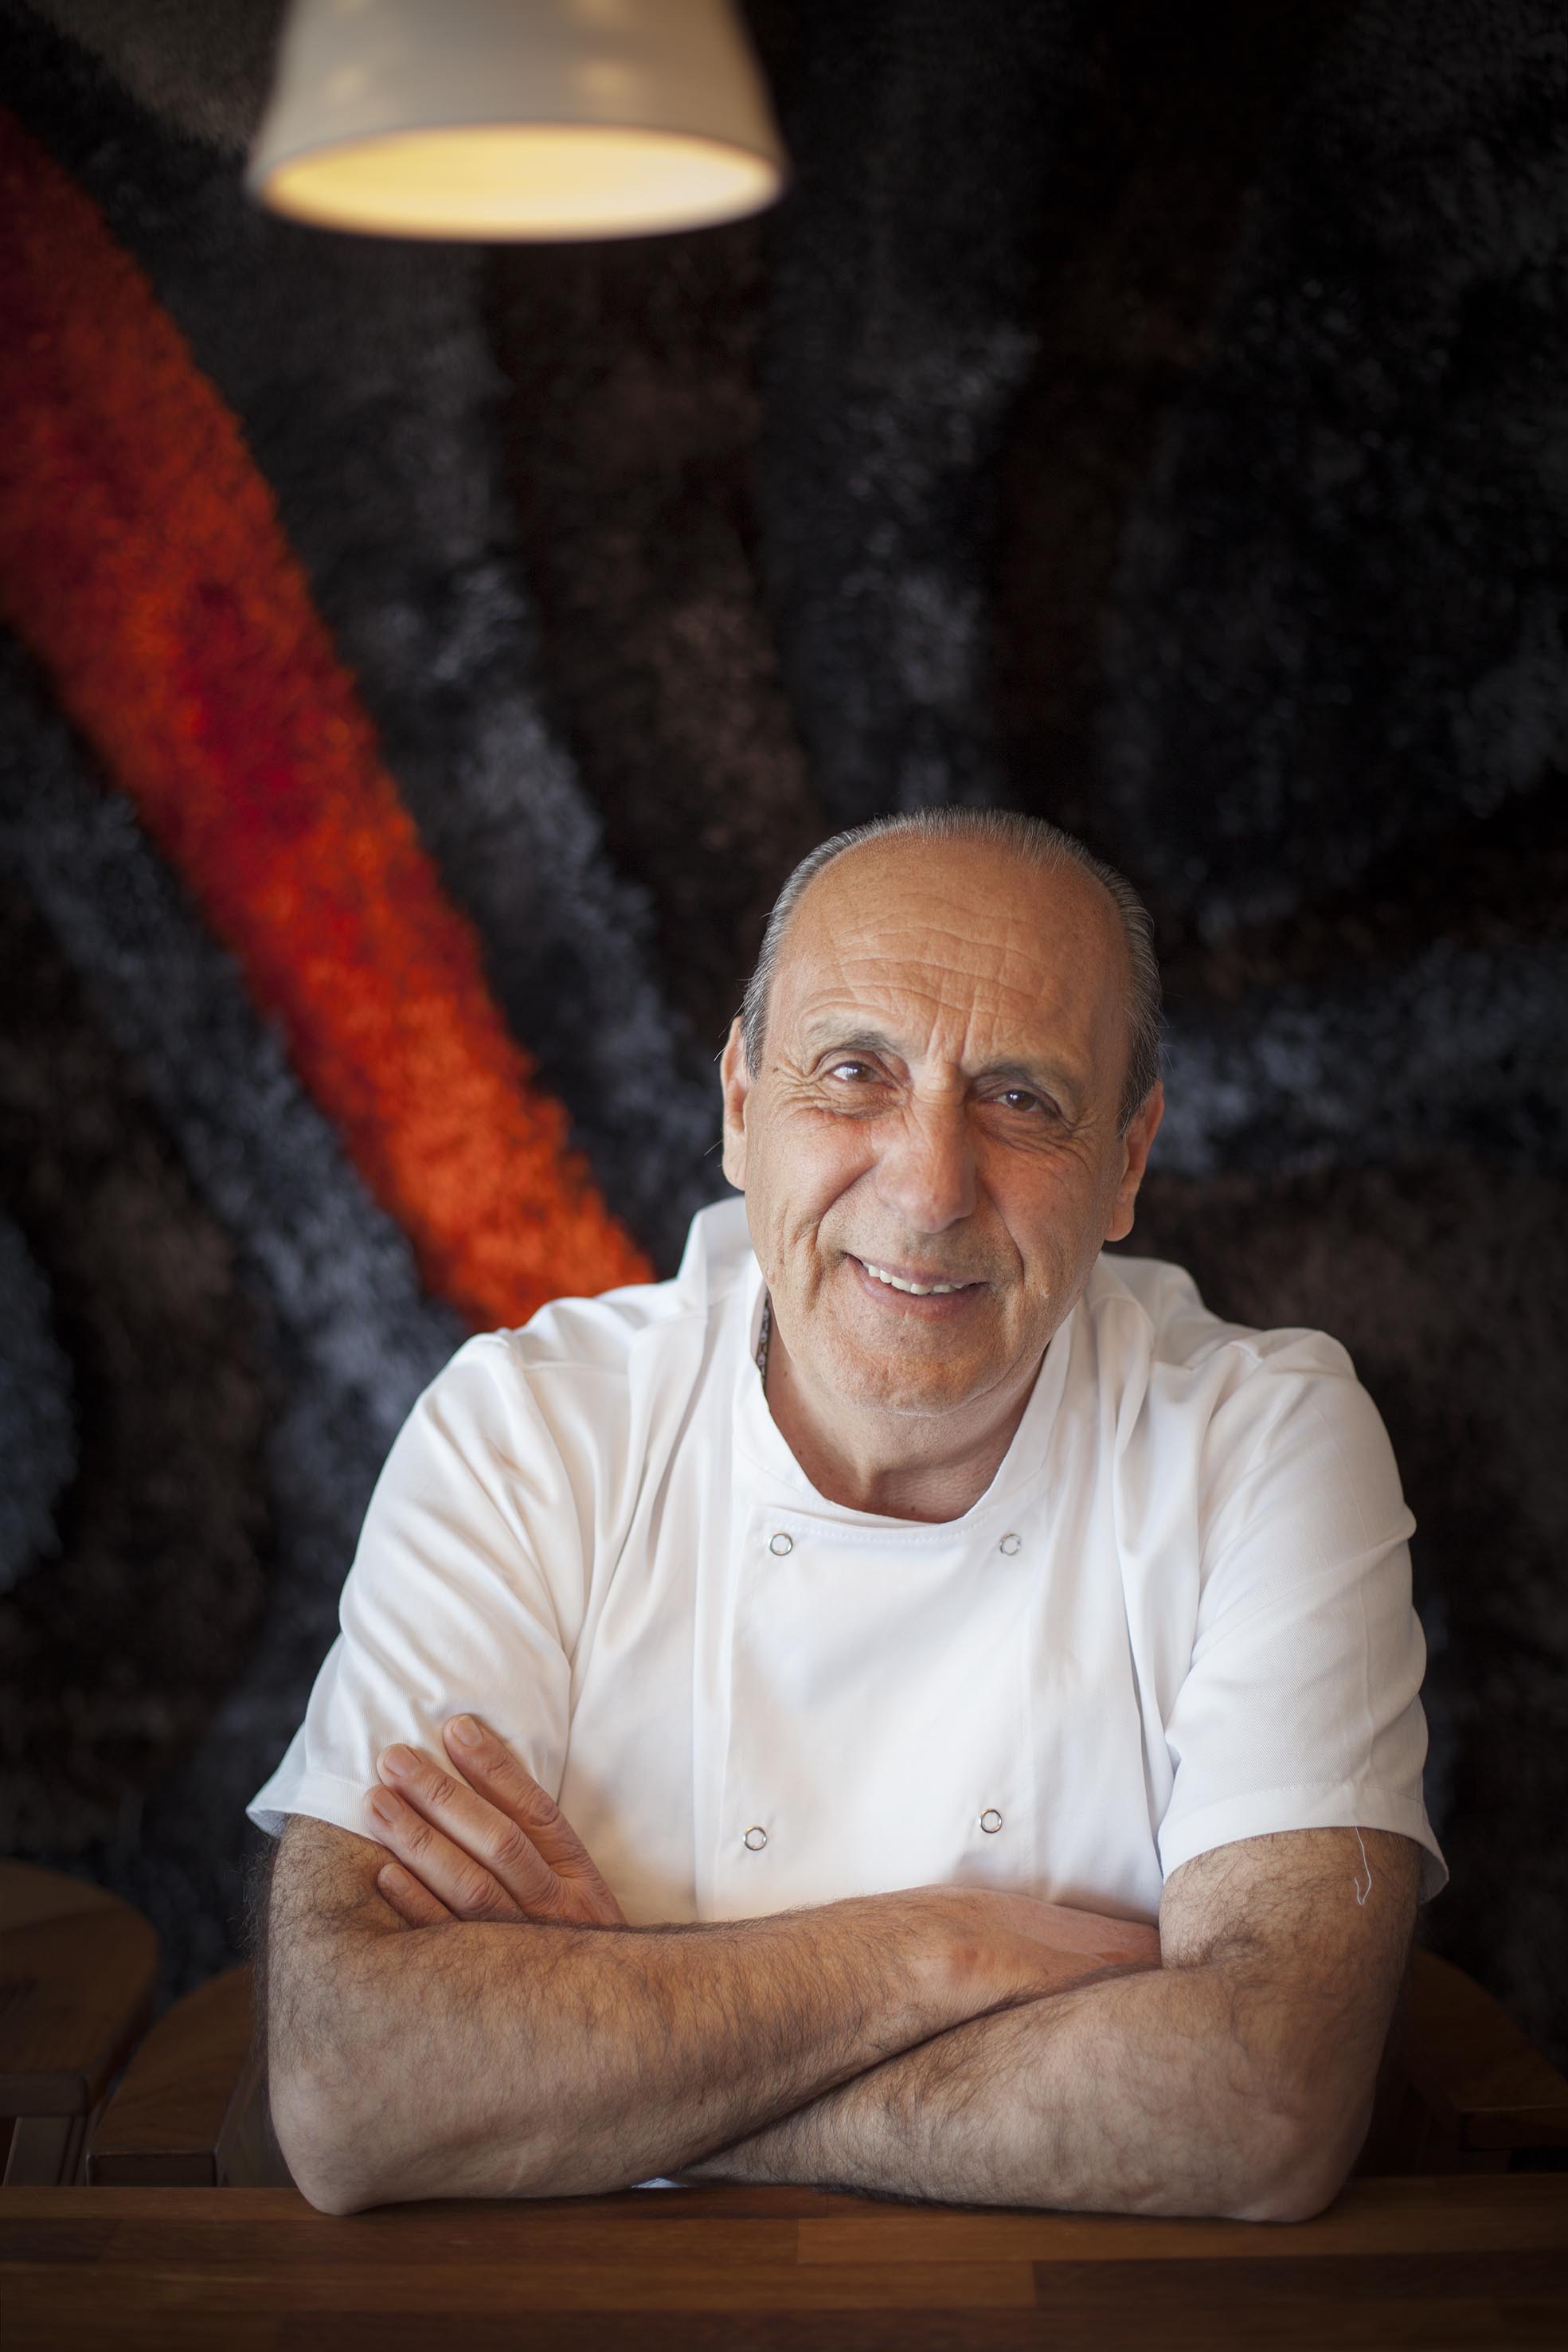 Gennaro Contaldo is a world-renowned chef, with his own premisis in Cornwall